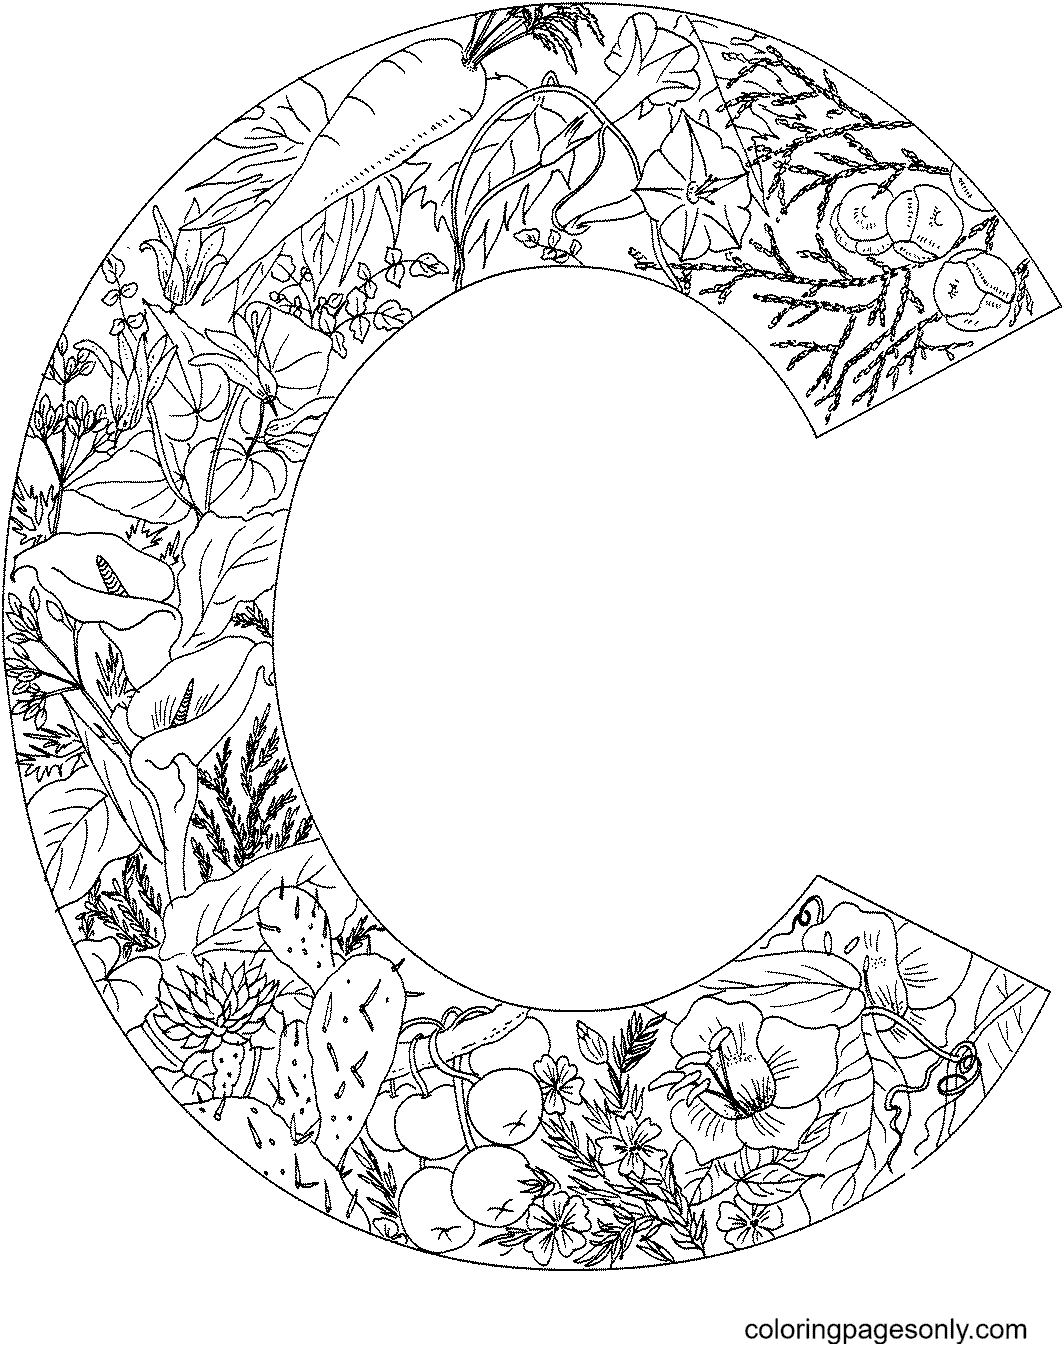 Letter C with Plants Coloring Page